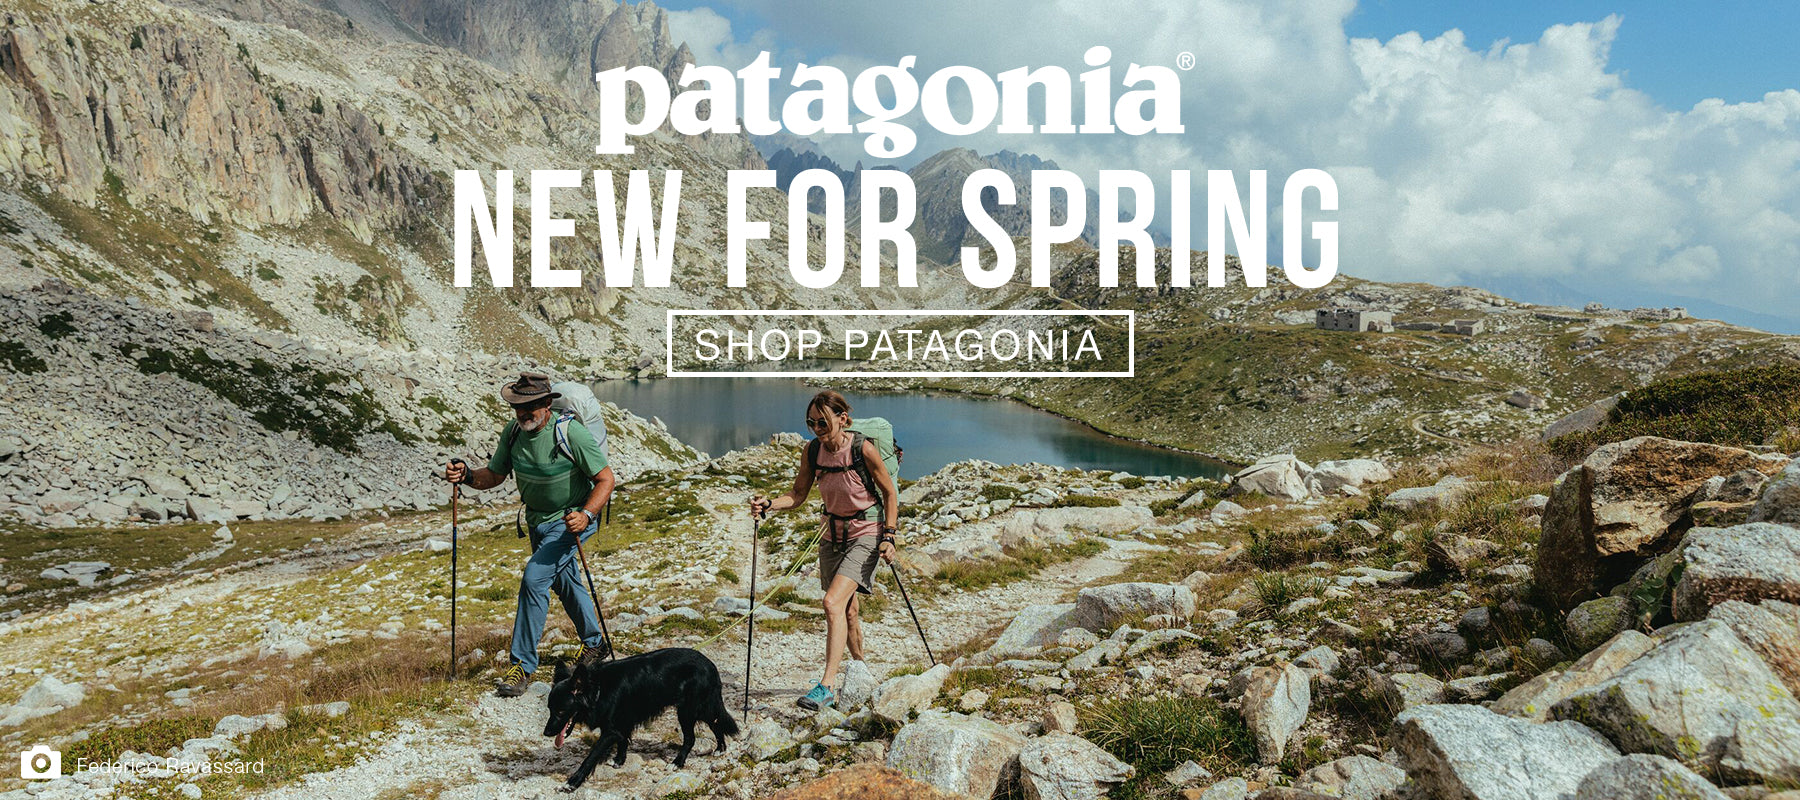 Patagonia New for Spring Shop Now